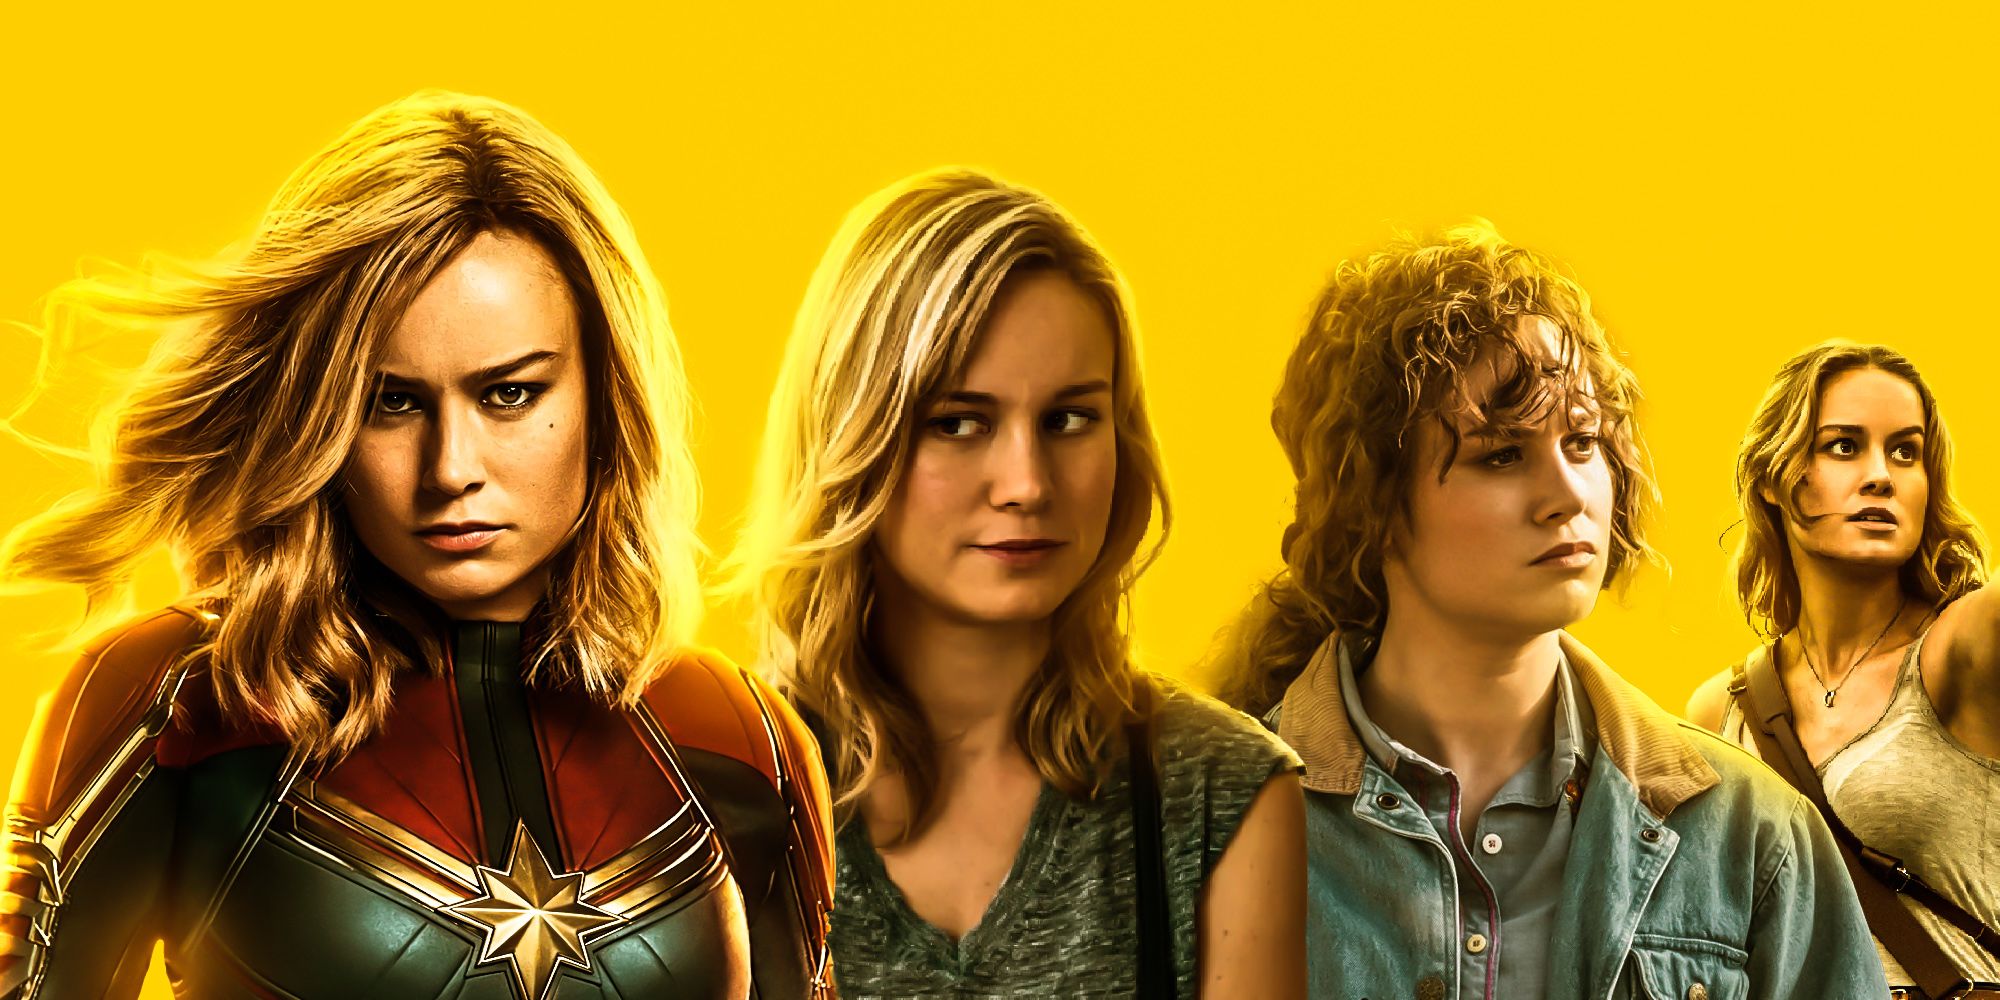 Brie Larson in Captain Marvel, Kong, Just Mercy, and Trainwreck